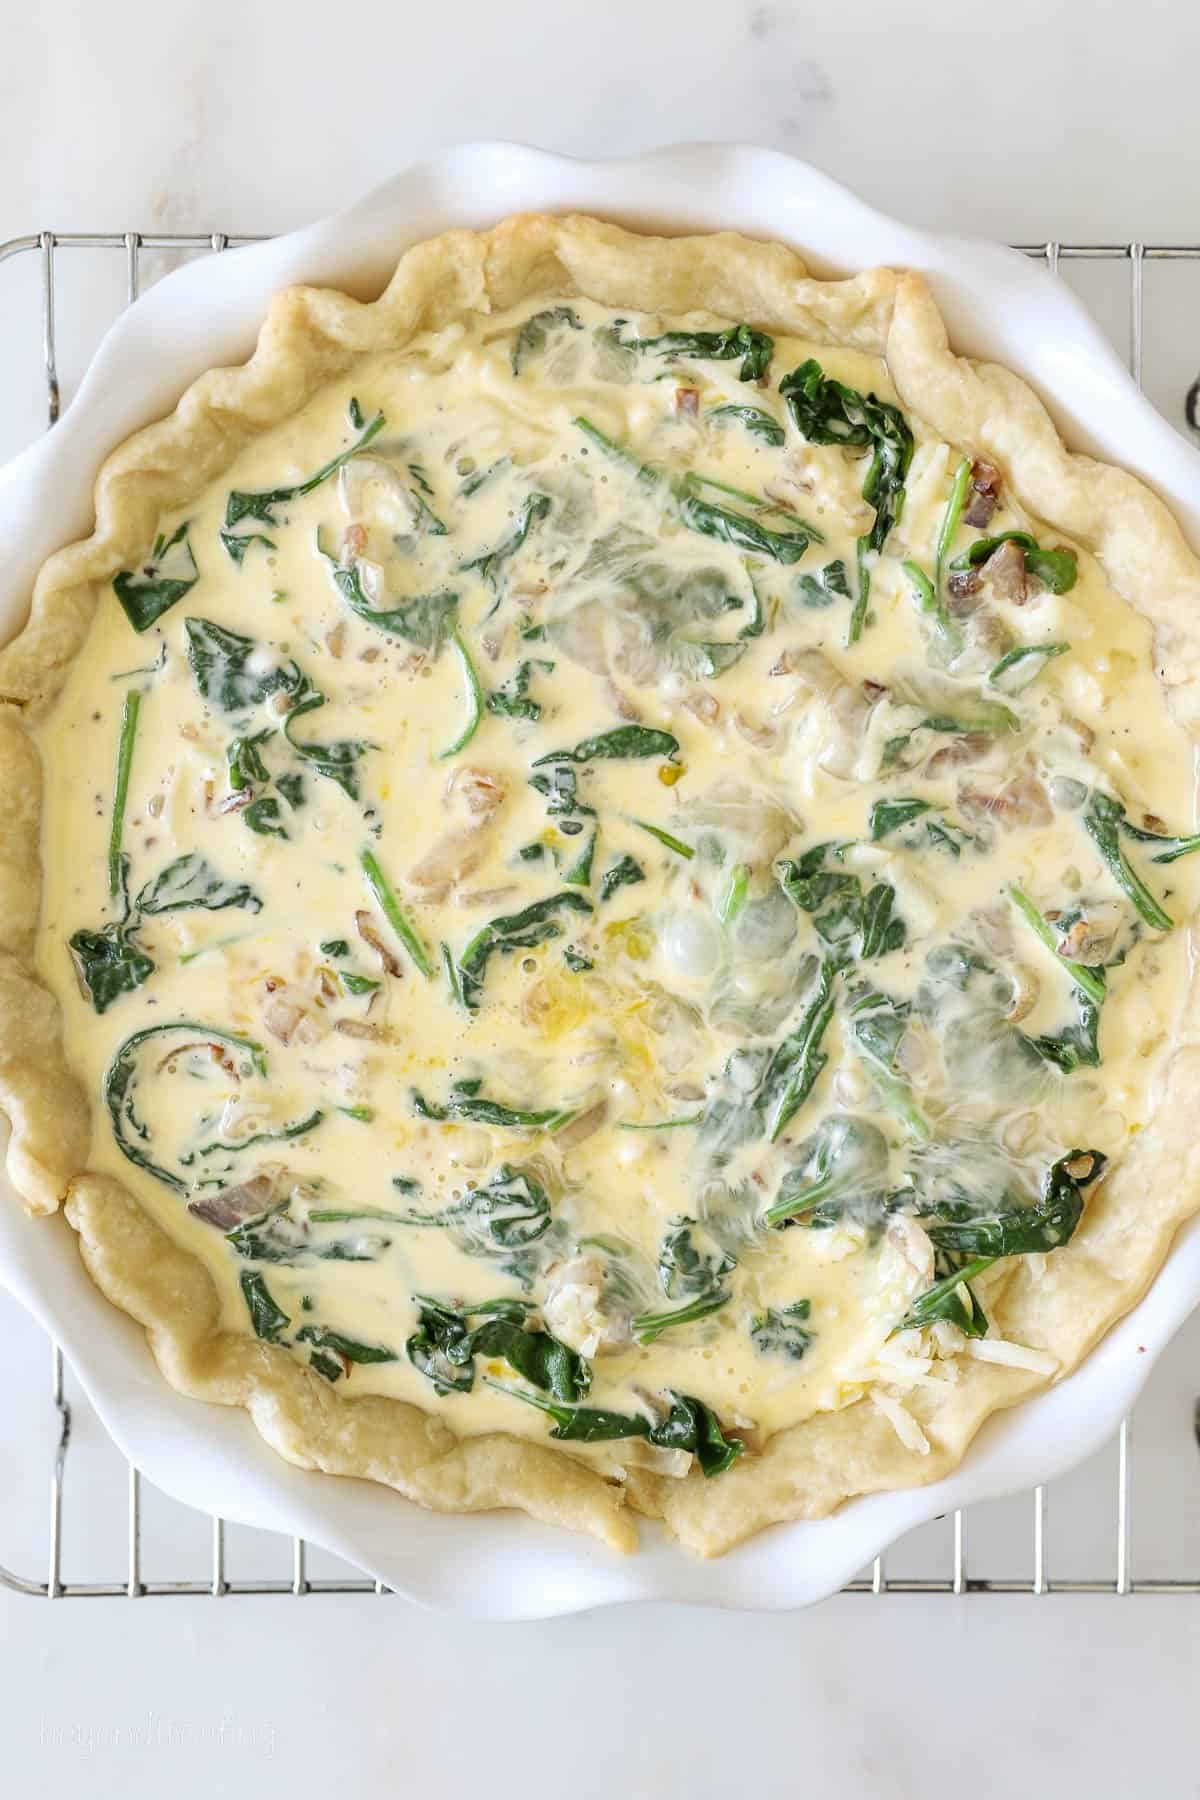 Overhead view of an unbaked quiche florentine